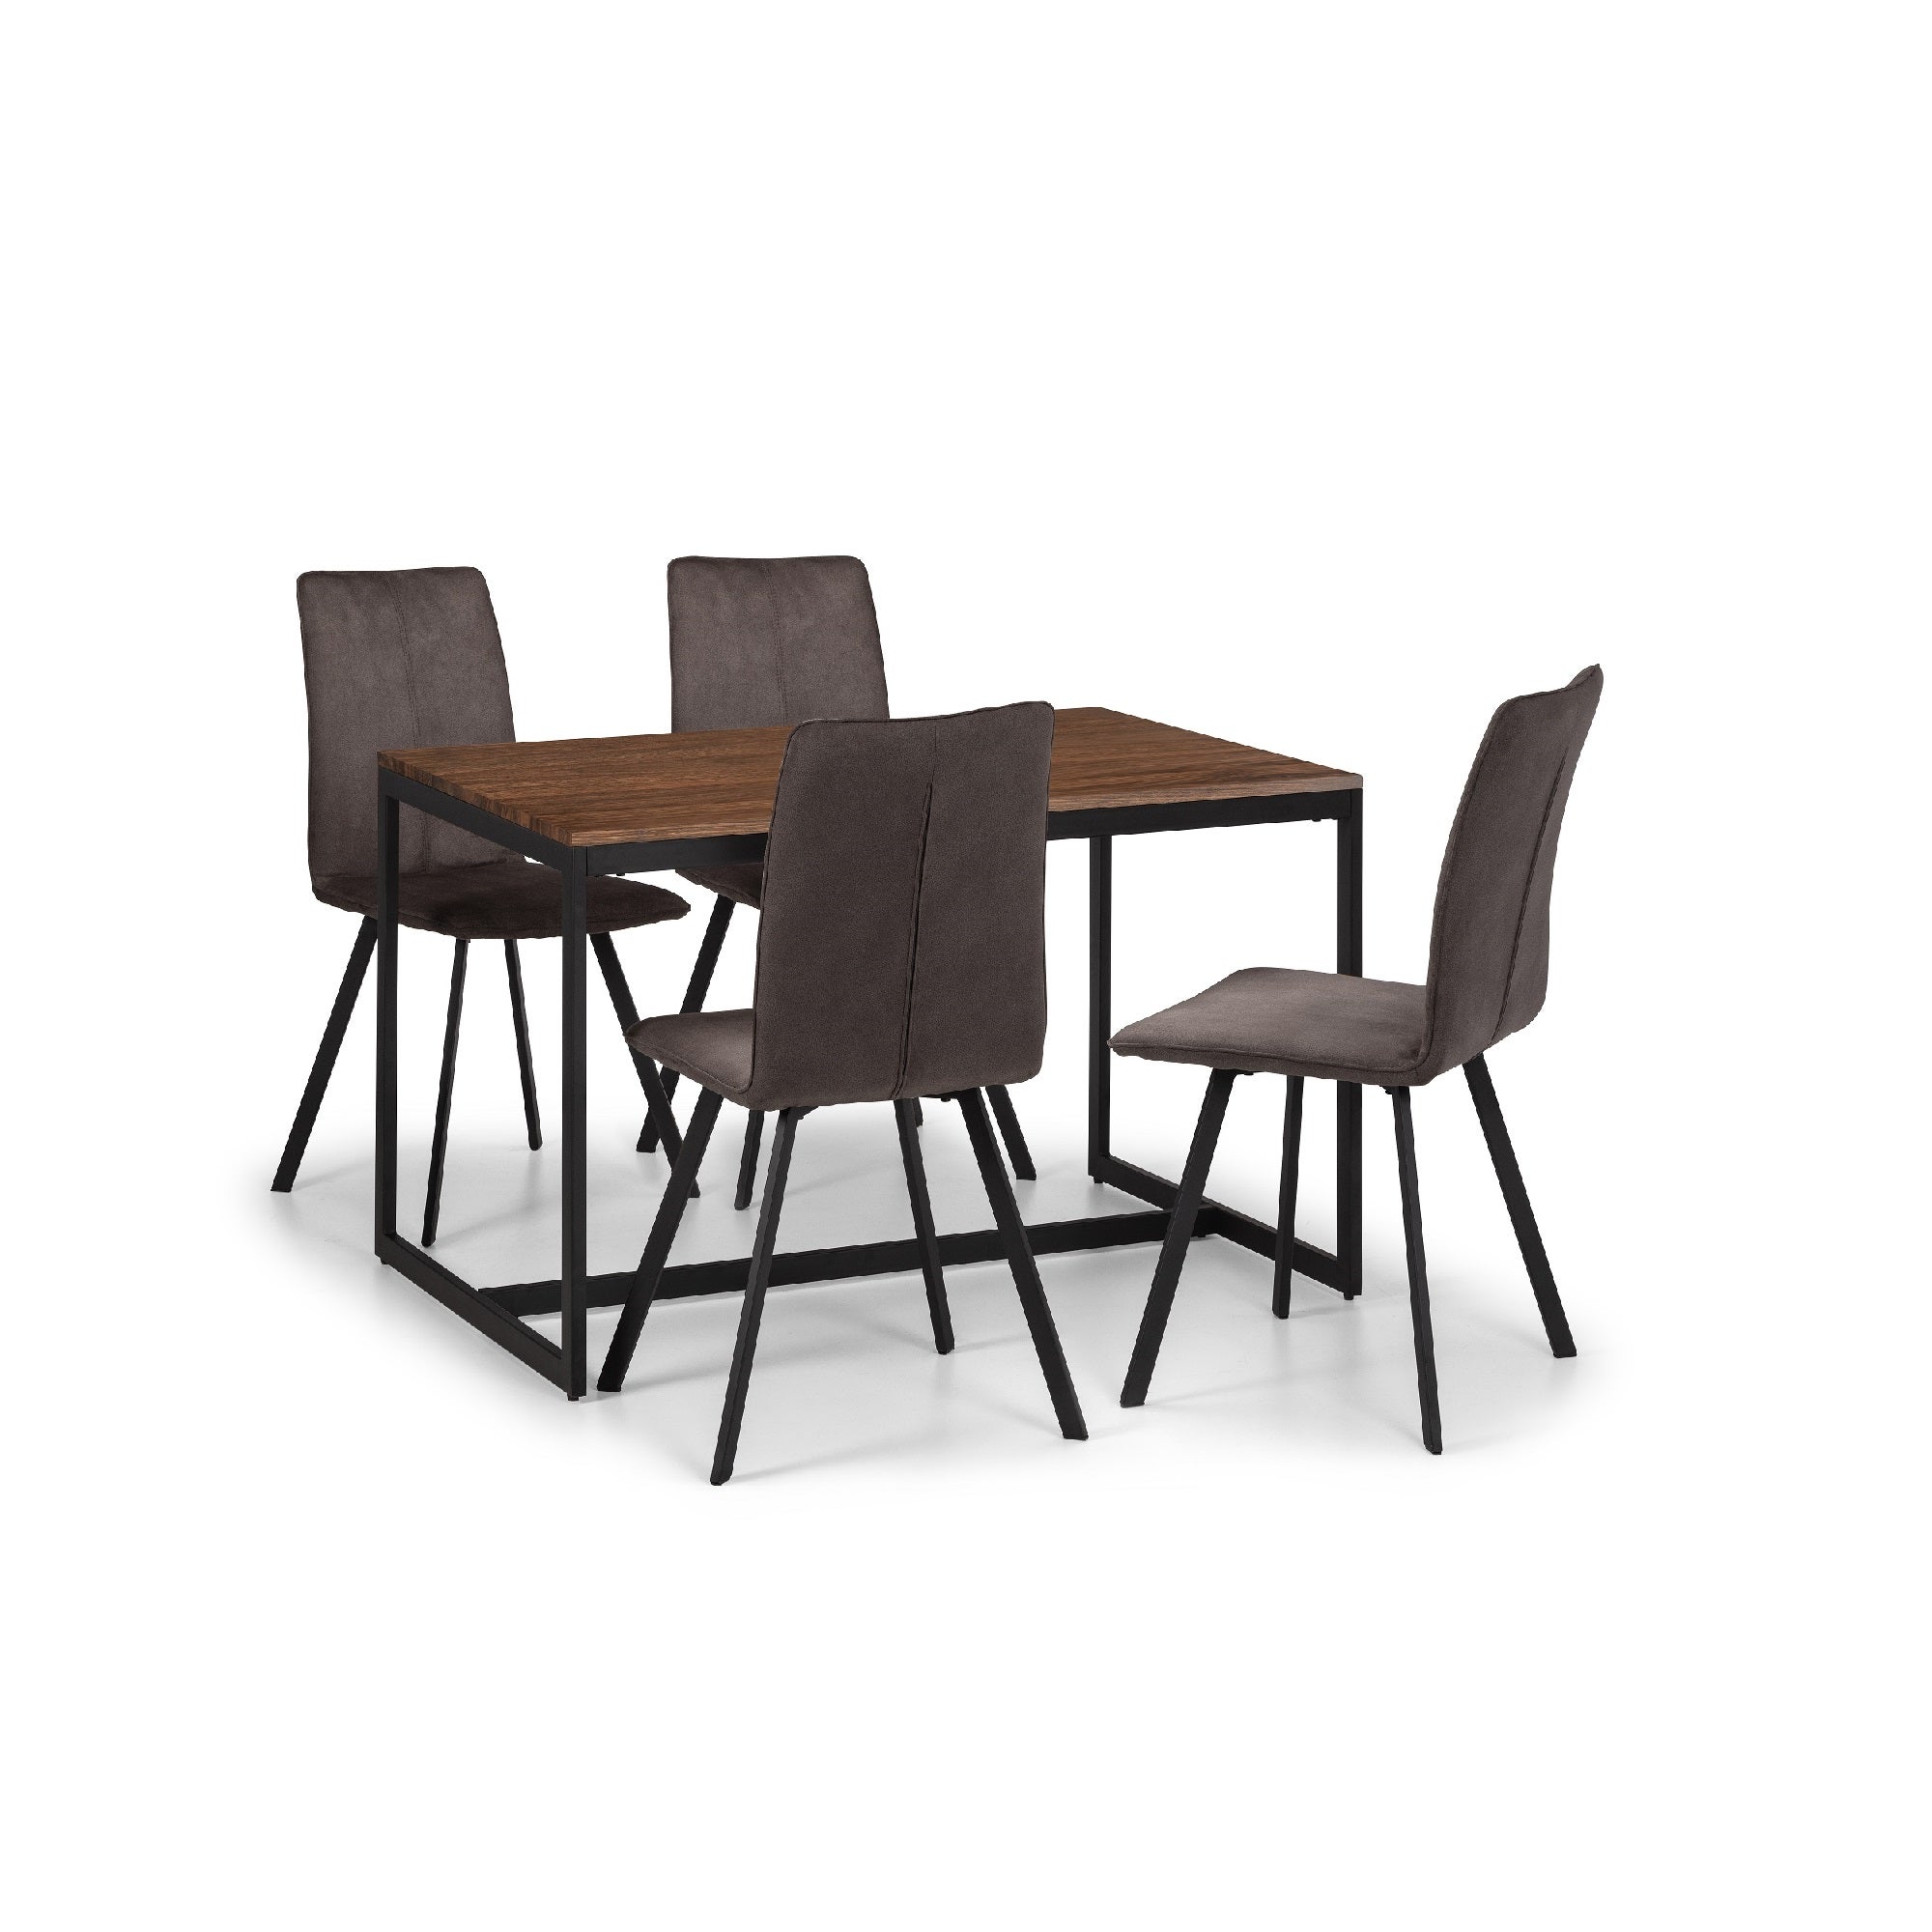 Tribeca Rectangular Dining Table with 4 Monroe Chairs, Brown Brown